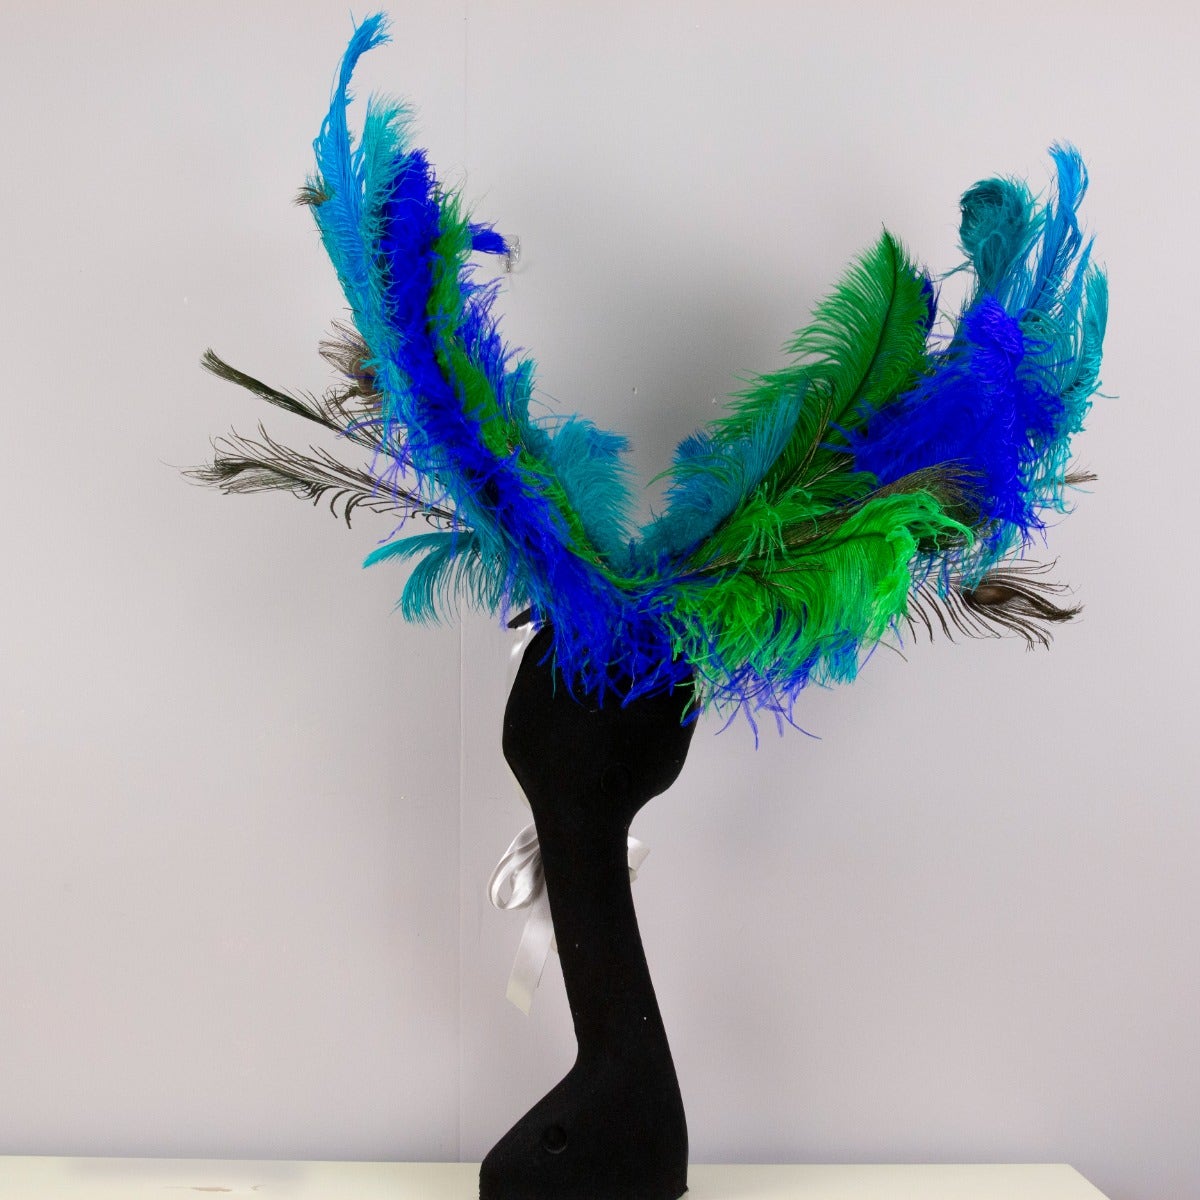 Zucker –Peacock Feathers – Feathers for Crafts